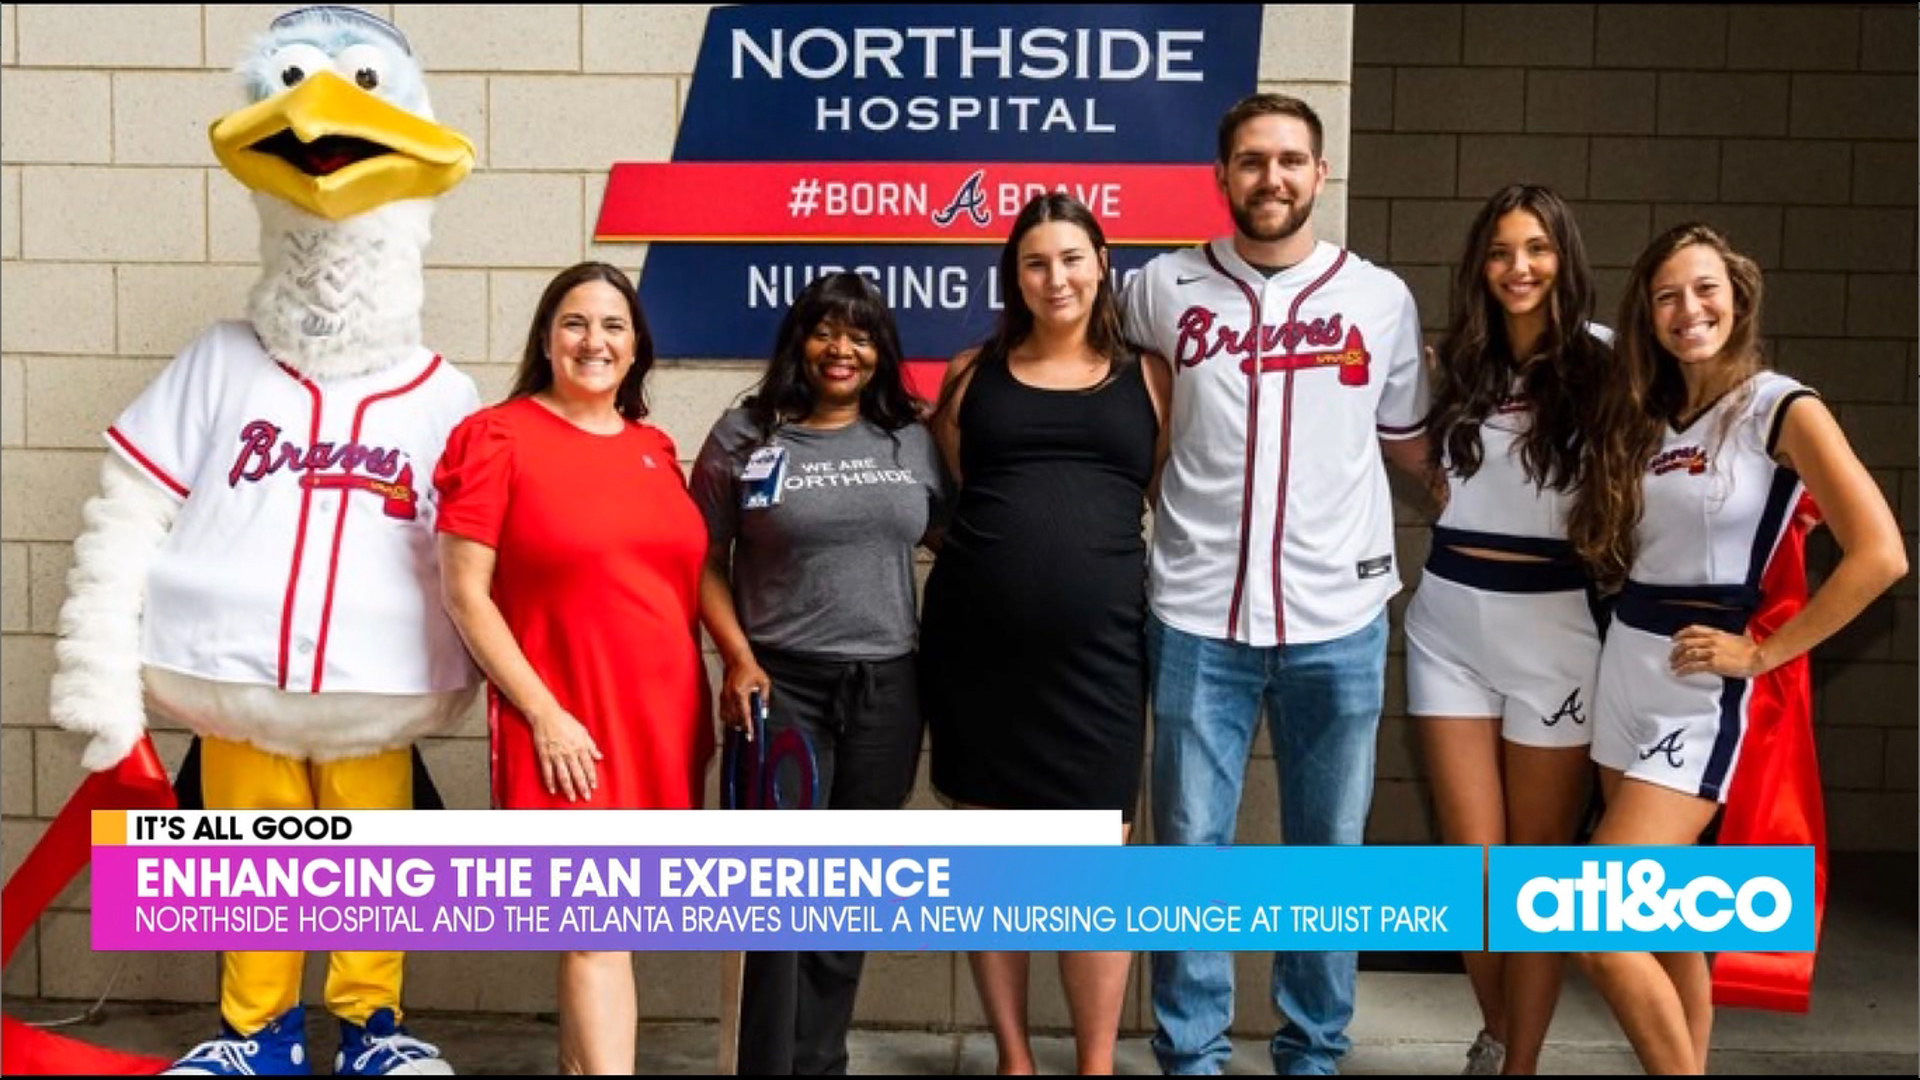 The Atlanta Braves and Northside Hospital just unveiled a new nursing lounge for moms and babies.